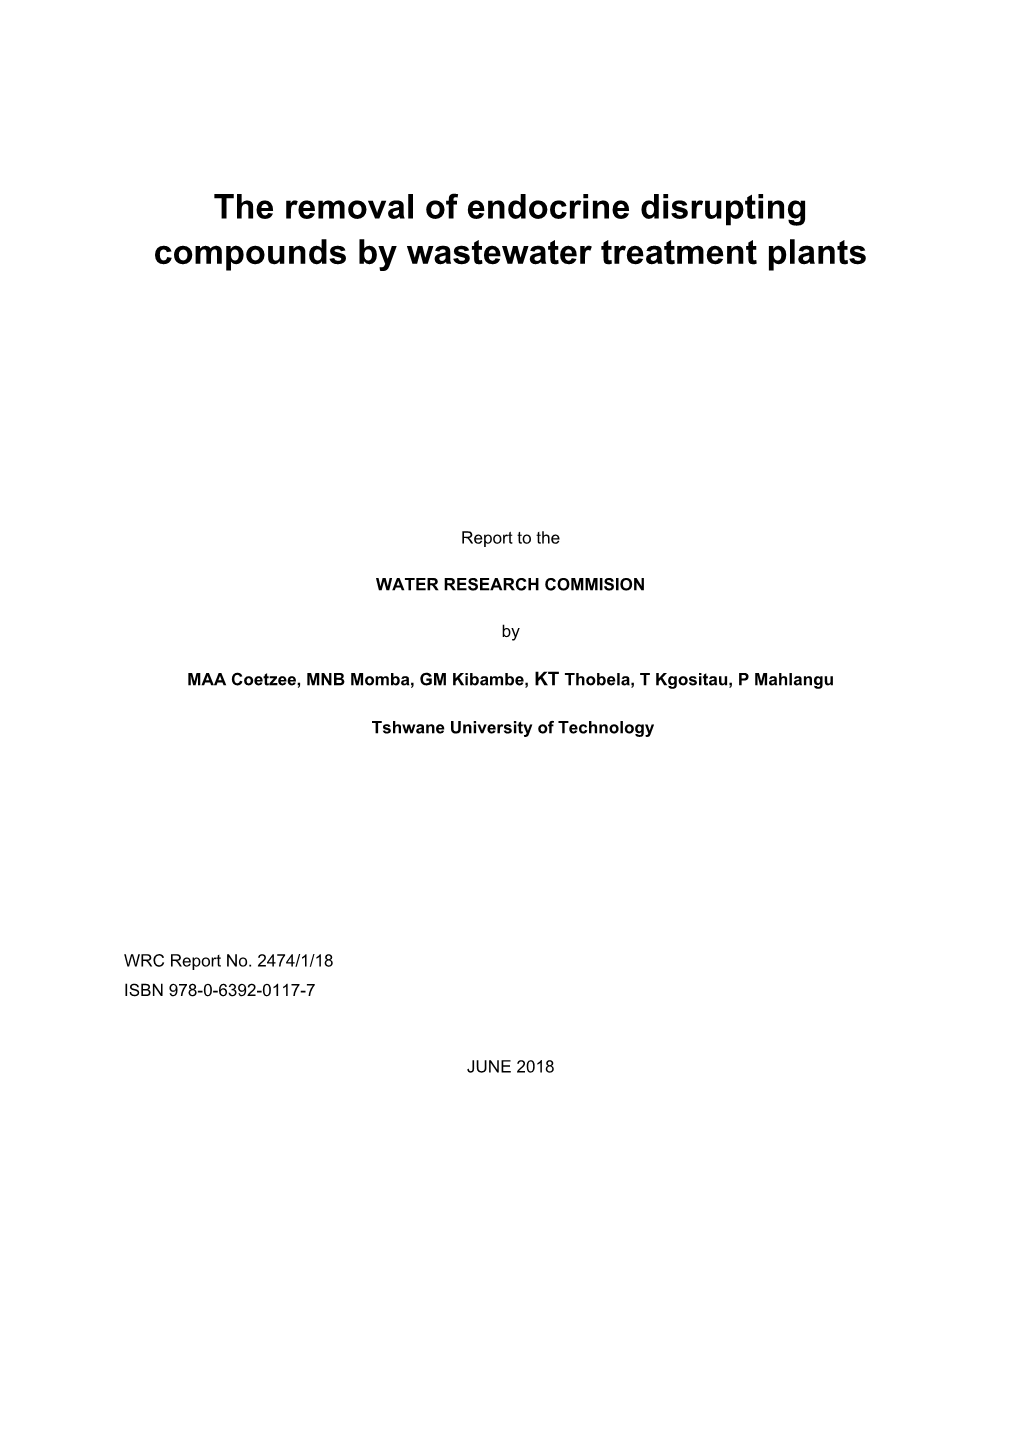 The Removal of Endocrine Disrupting Compounds by Wastewater Treatment Plants